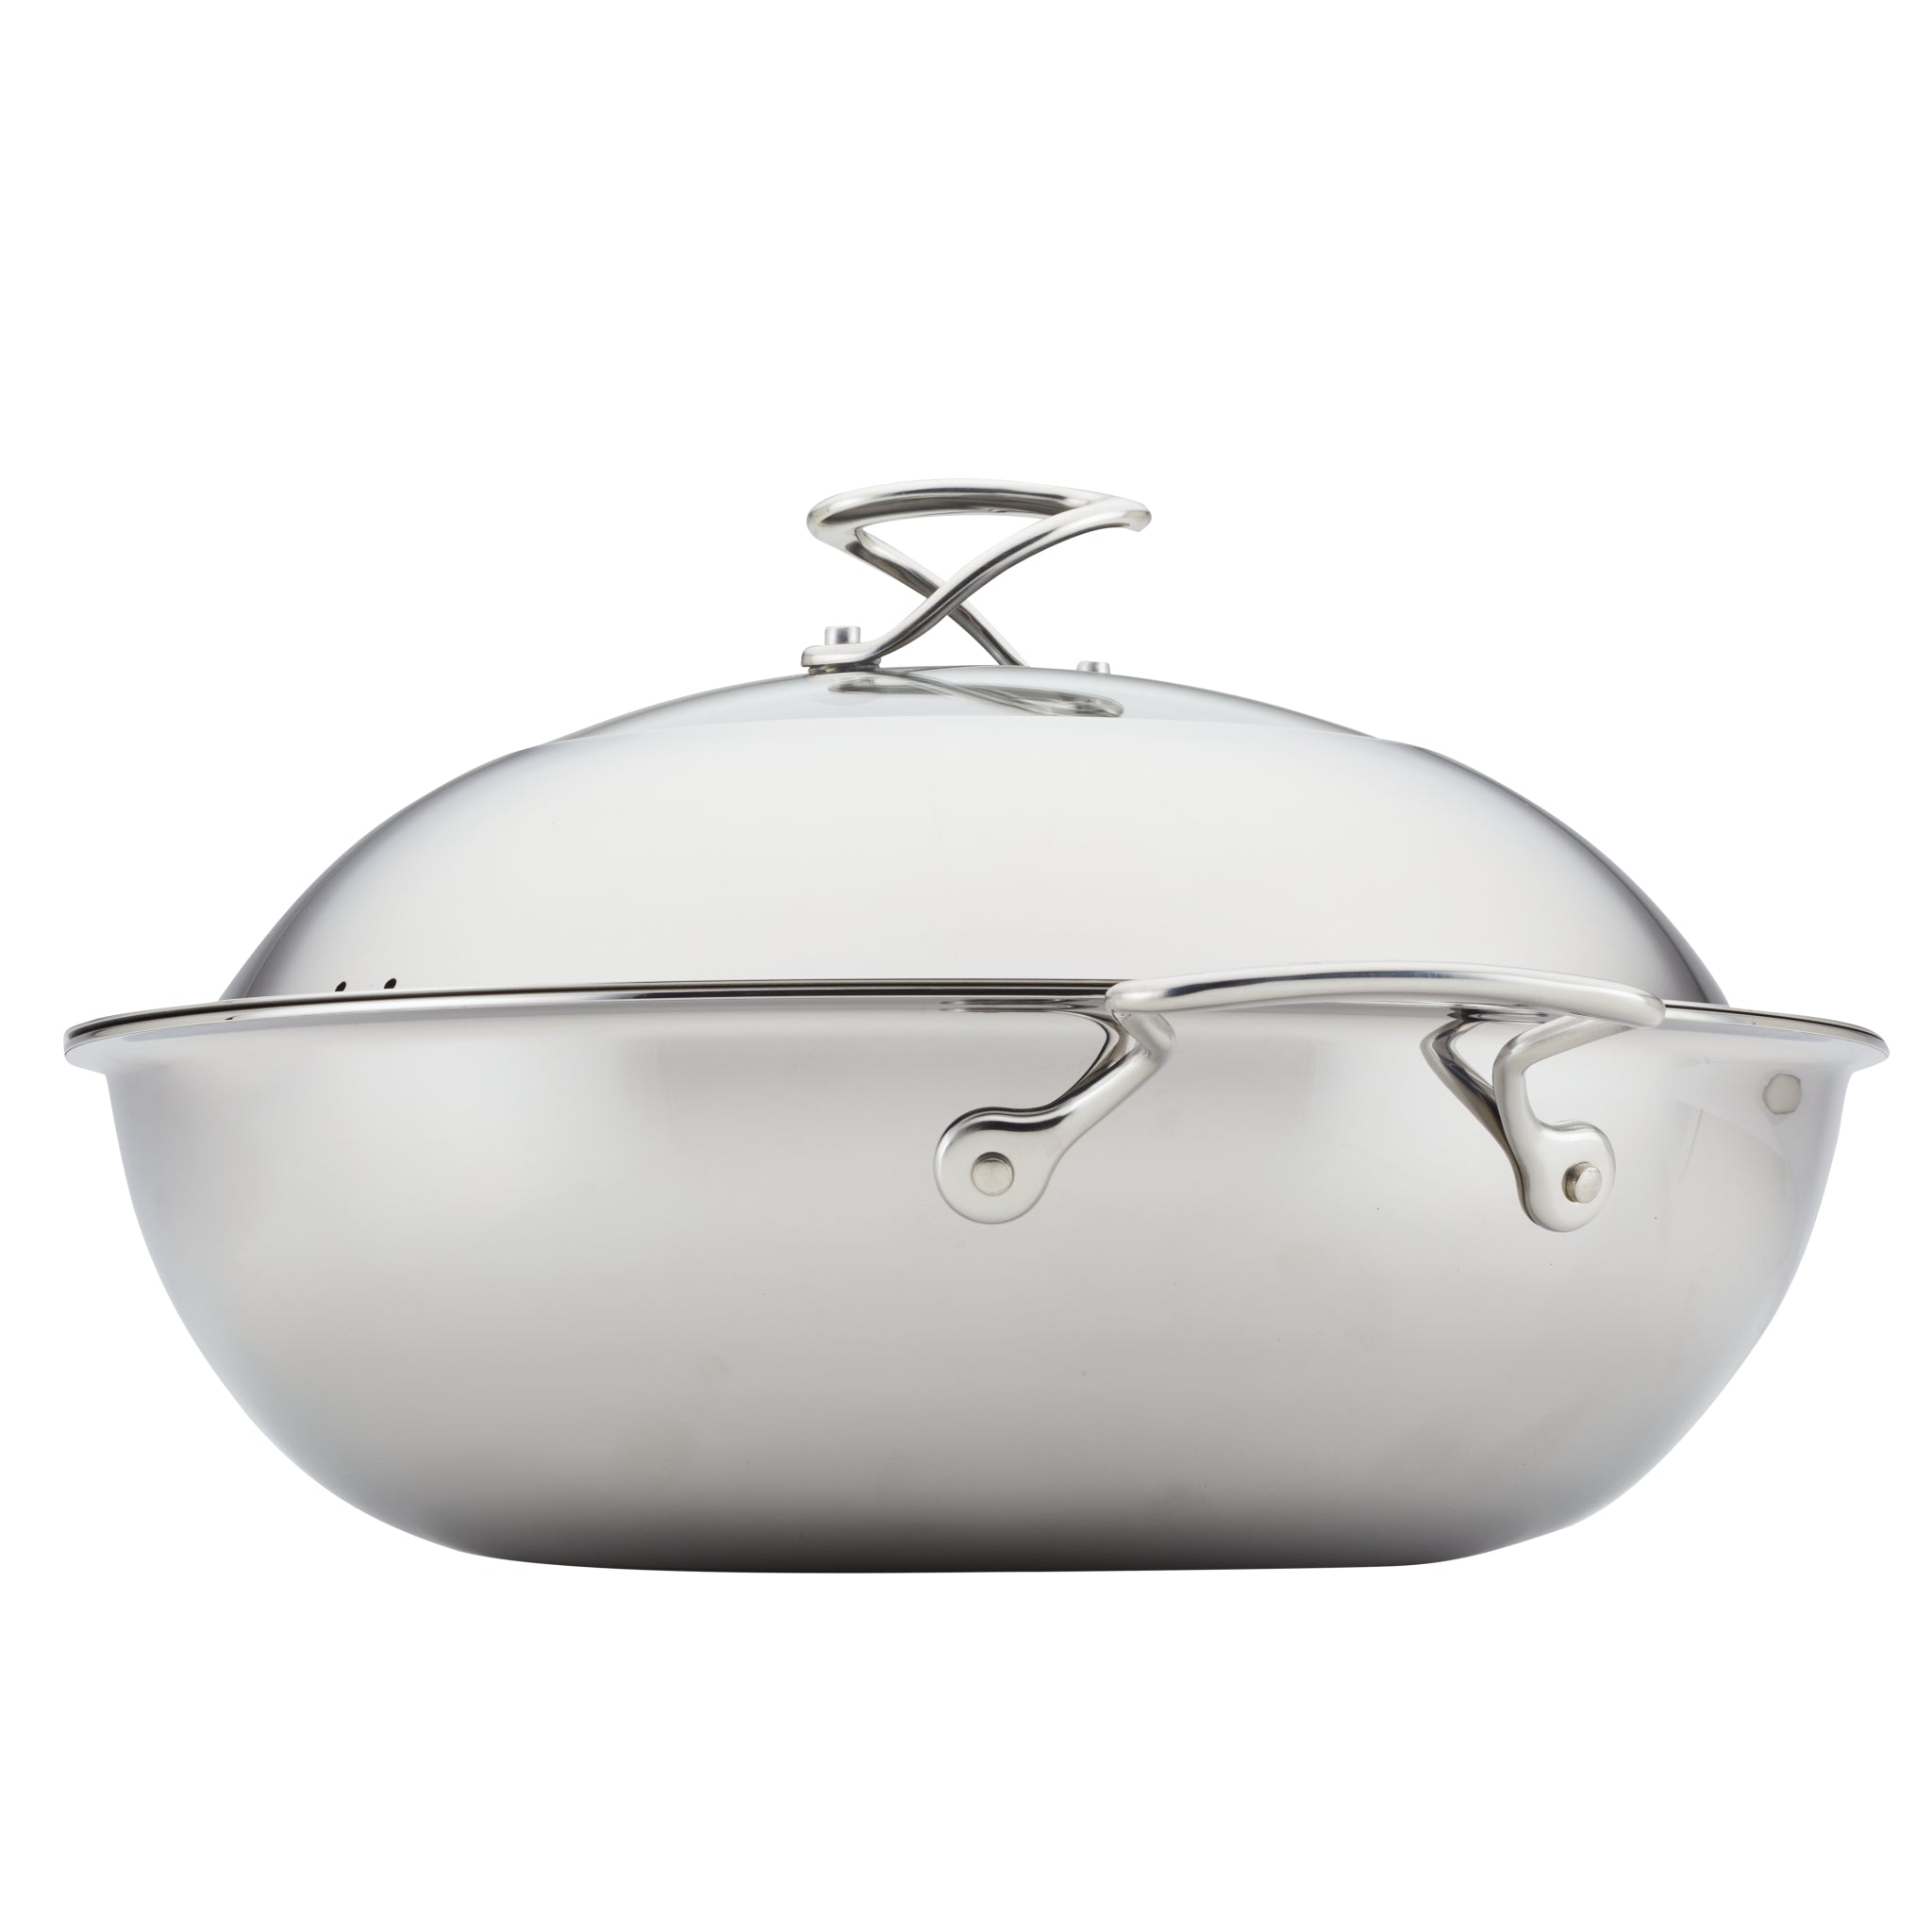 Circulon Clad Stainless Steel Wok/Stir Fry with Glass Lid and